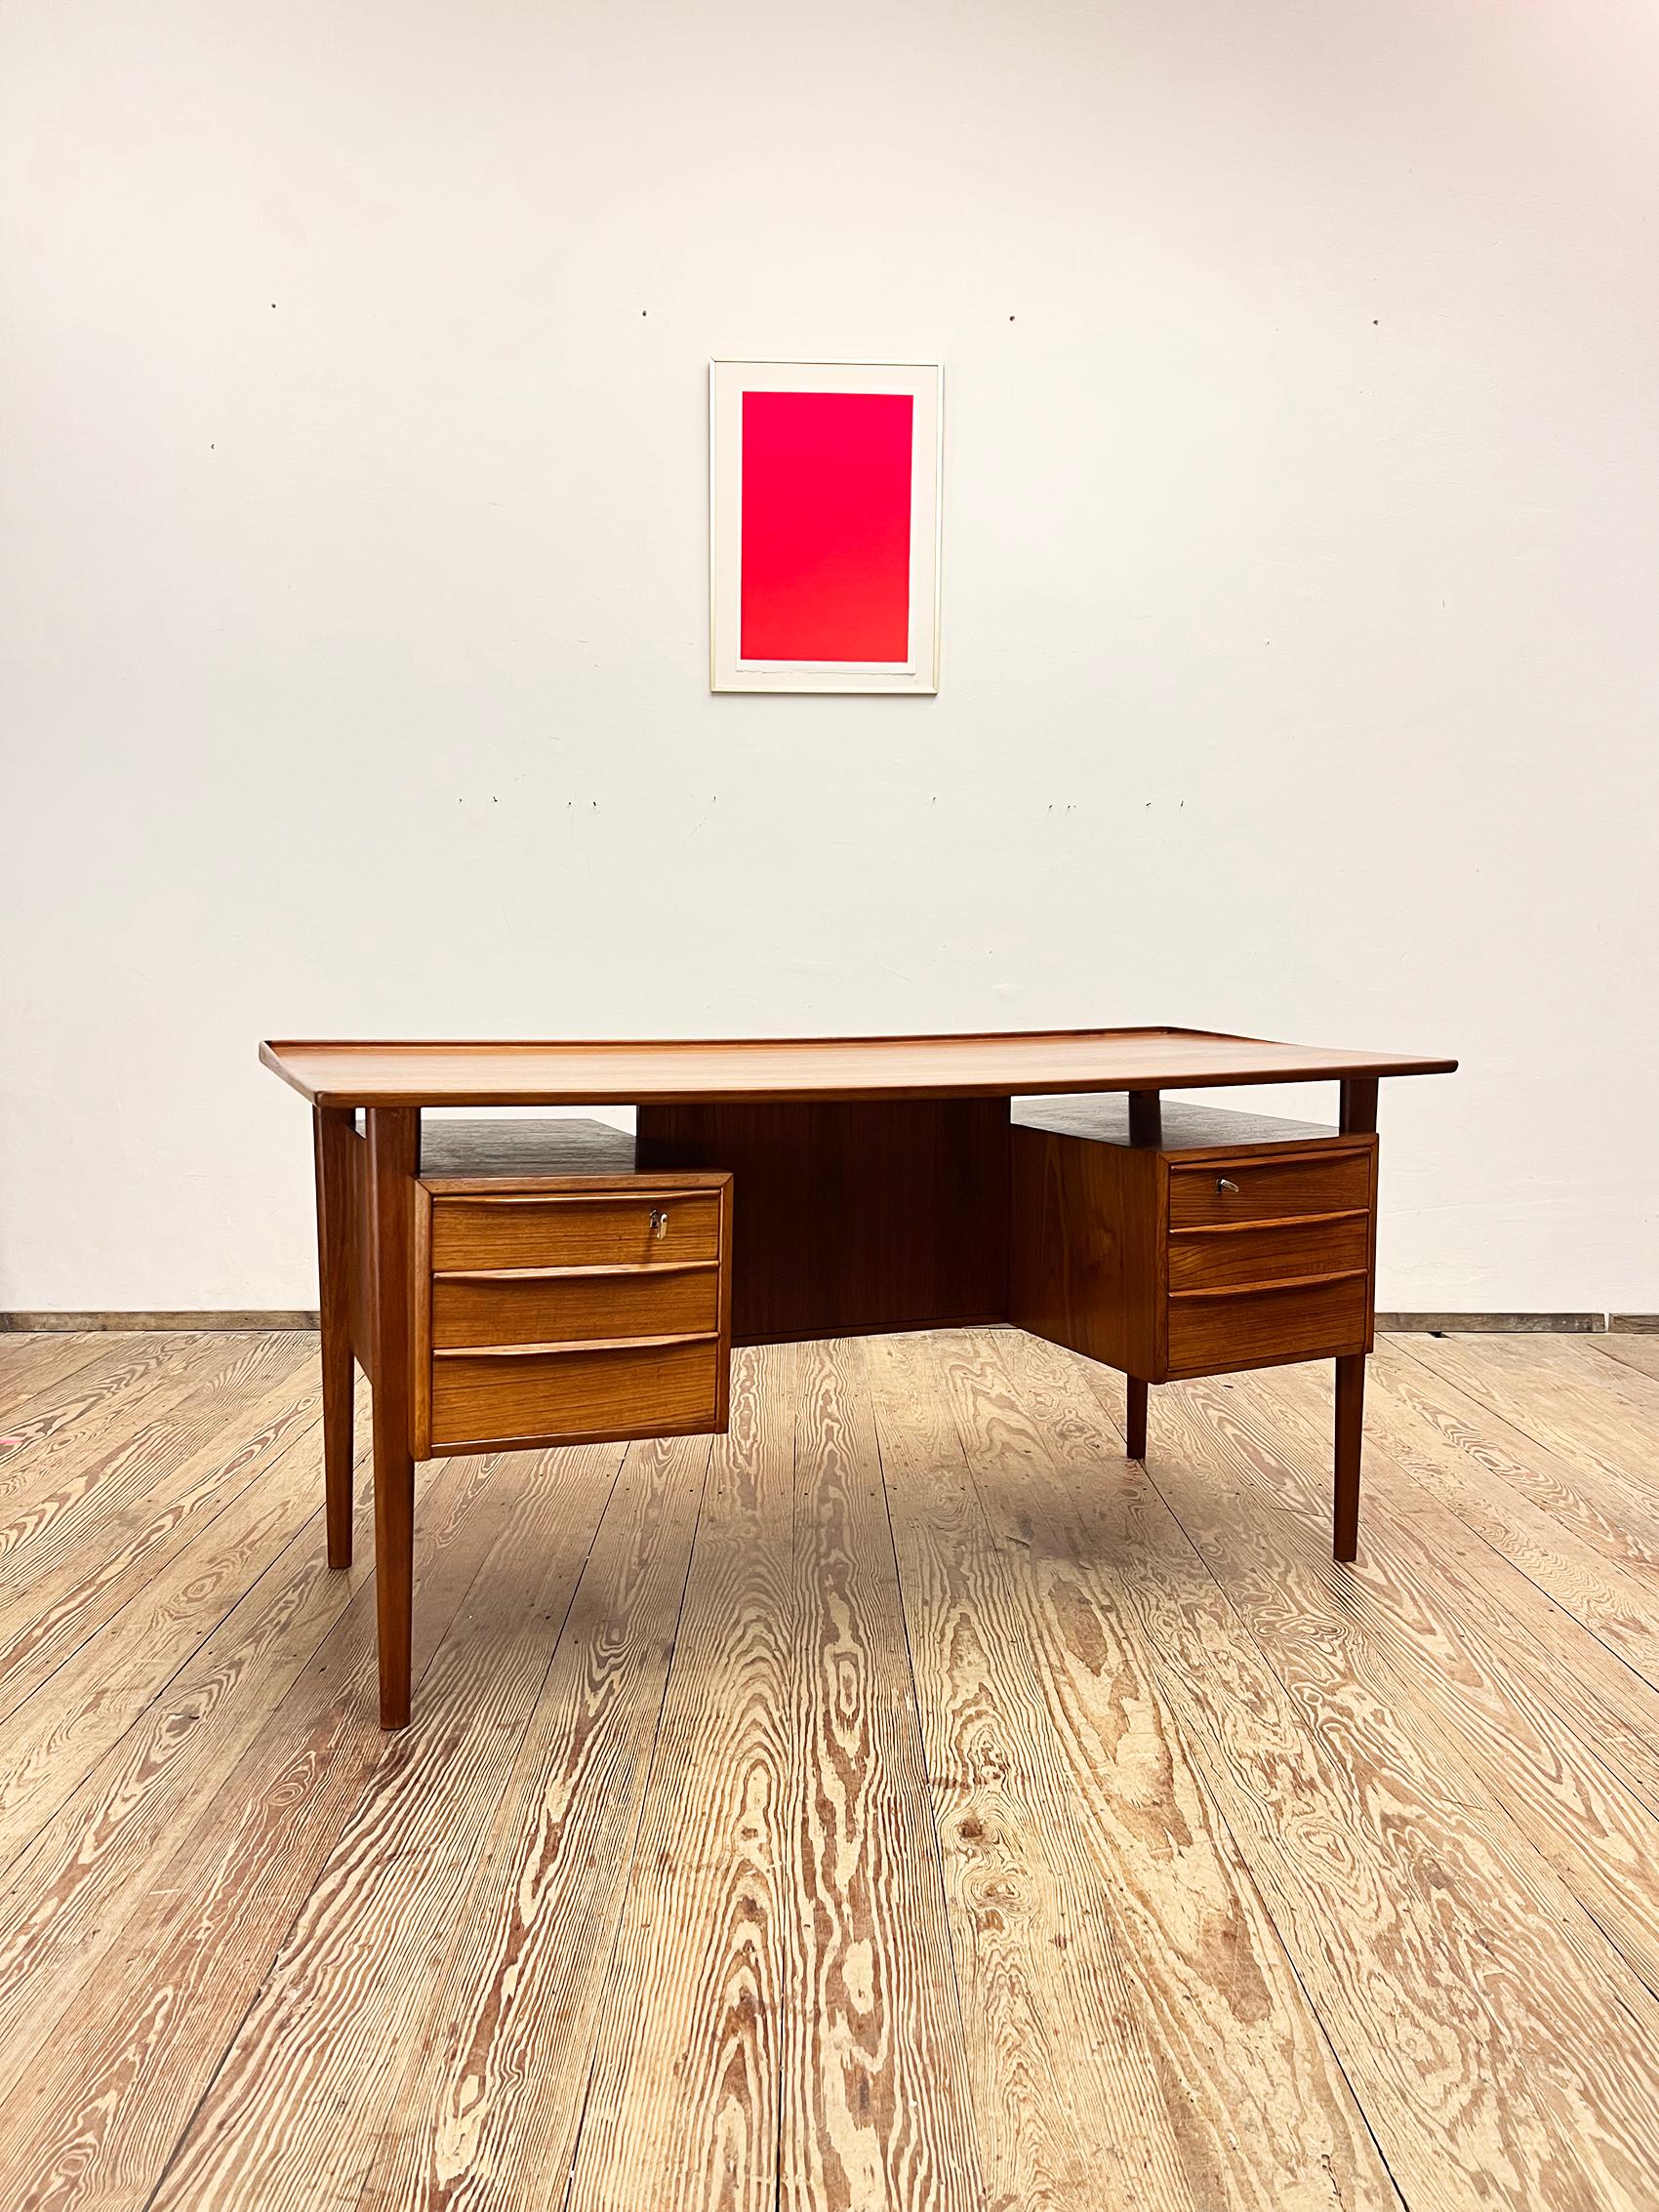 Dimensions 74 cm x 155 cm x 70 cm (Depth x Width x Height)


This free standing midcentury danish writing desk was designed by Peter Løvig Nielsen, produced by Hedensted Møbelfabrik Denmark in 1976. The table is made of teak wood and features two